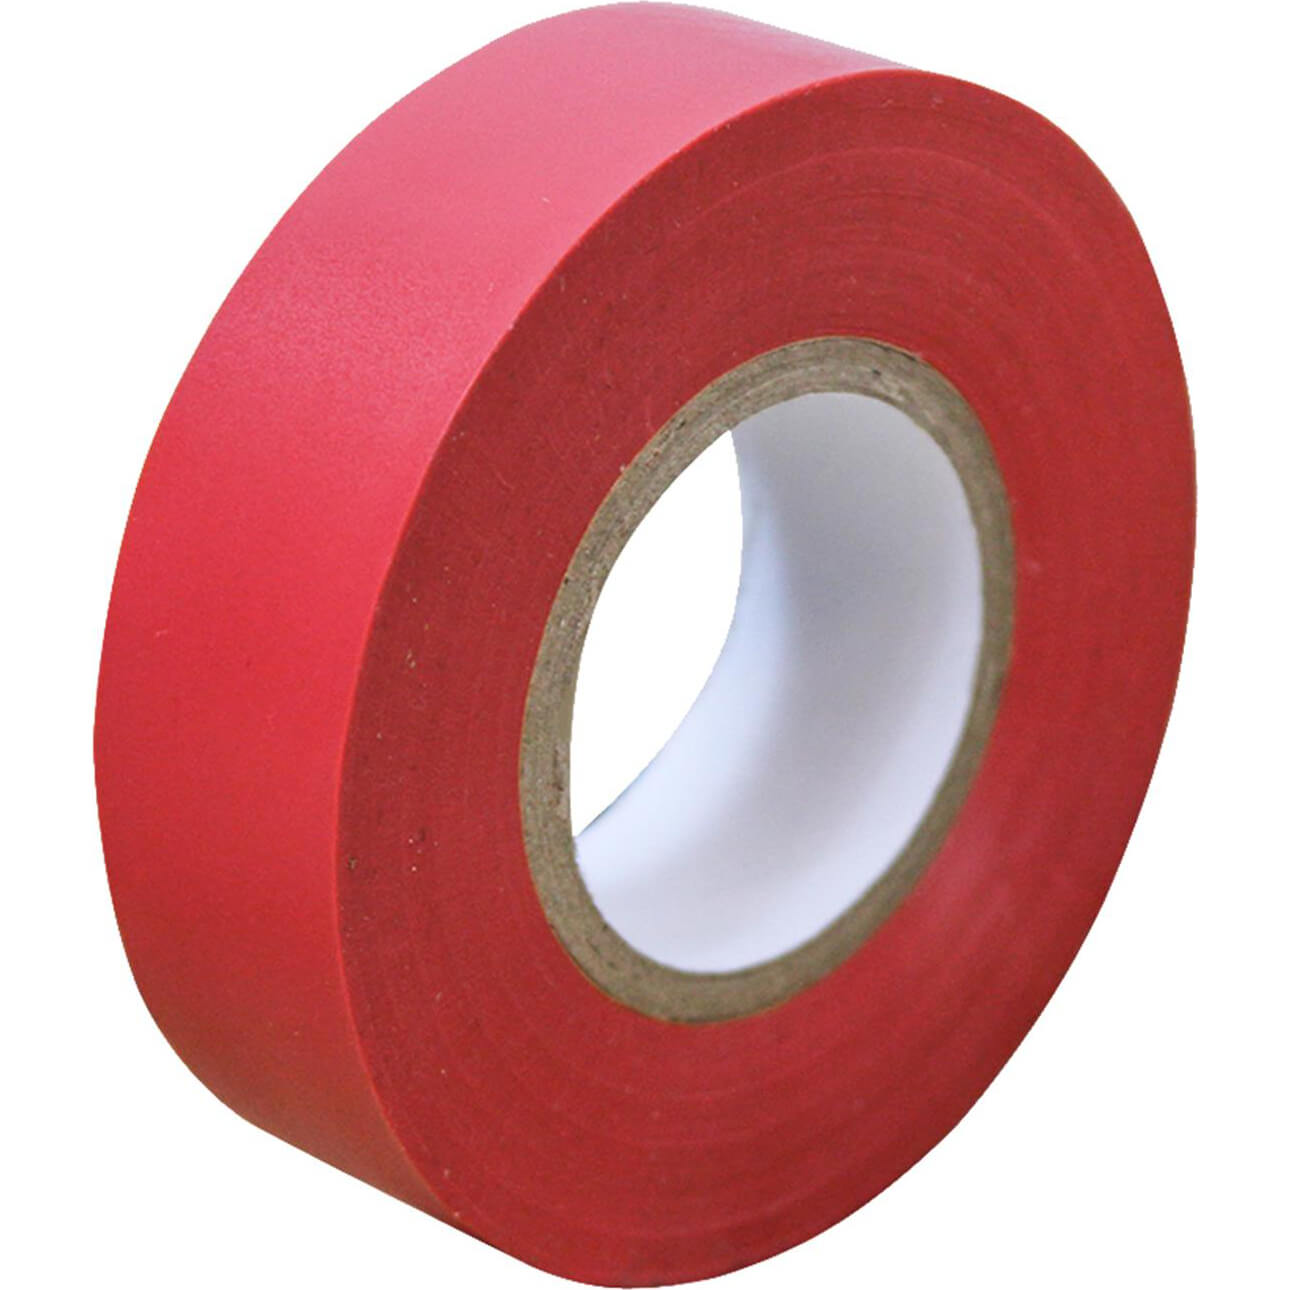 Insulation Tape Red 19mm Wide x 33m Roll